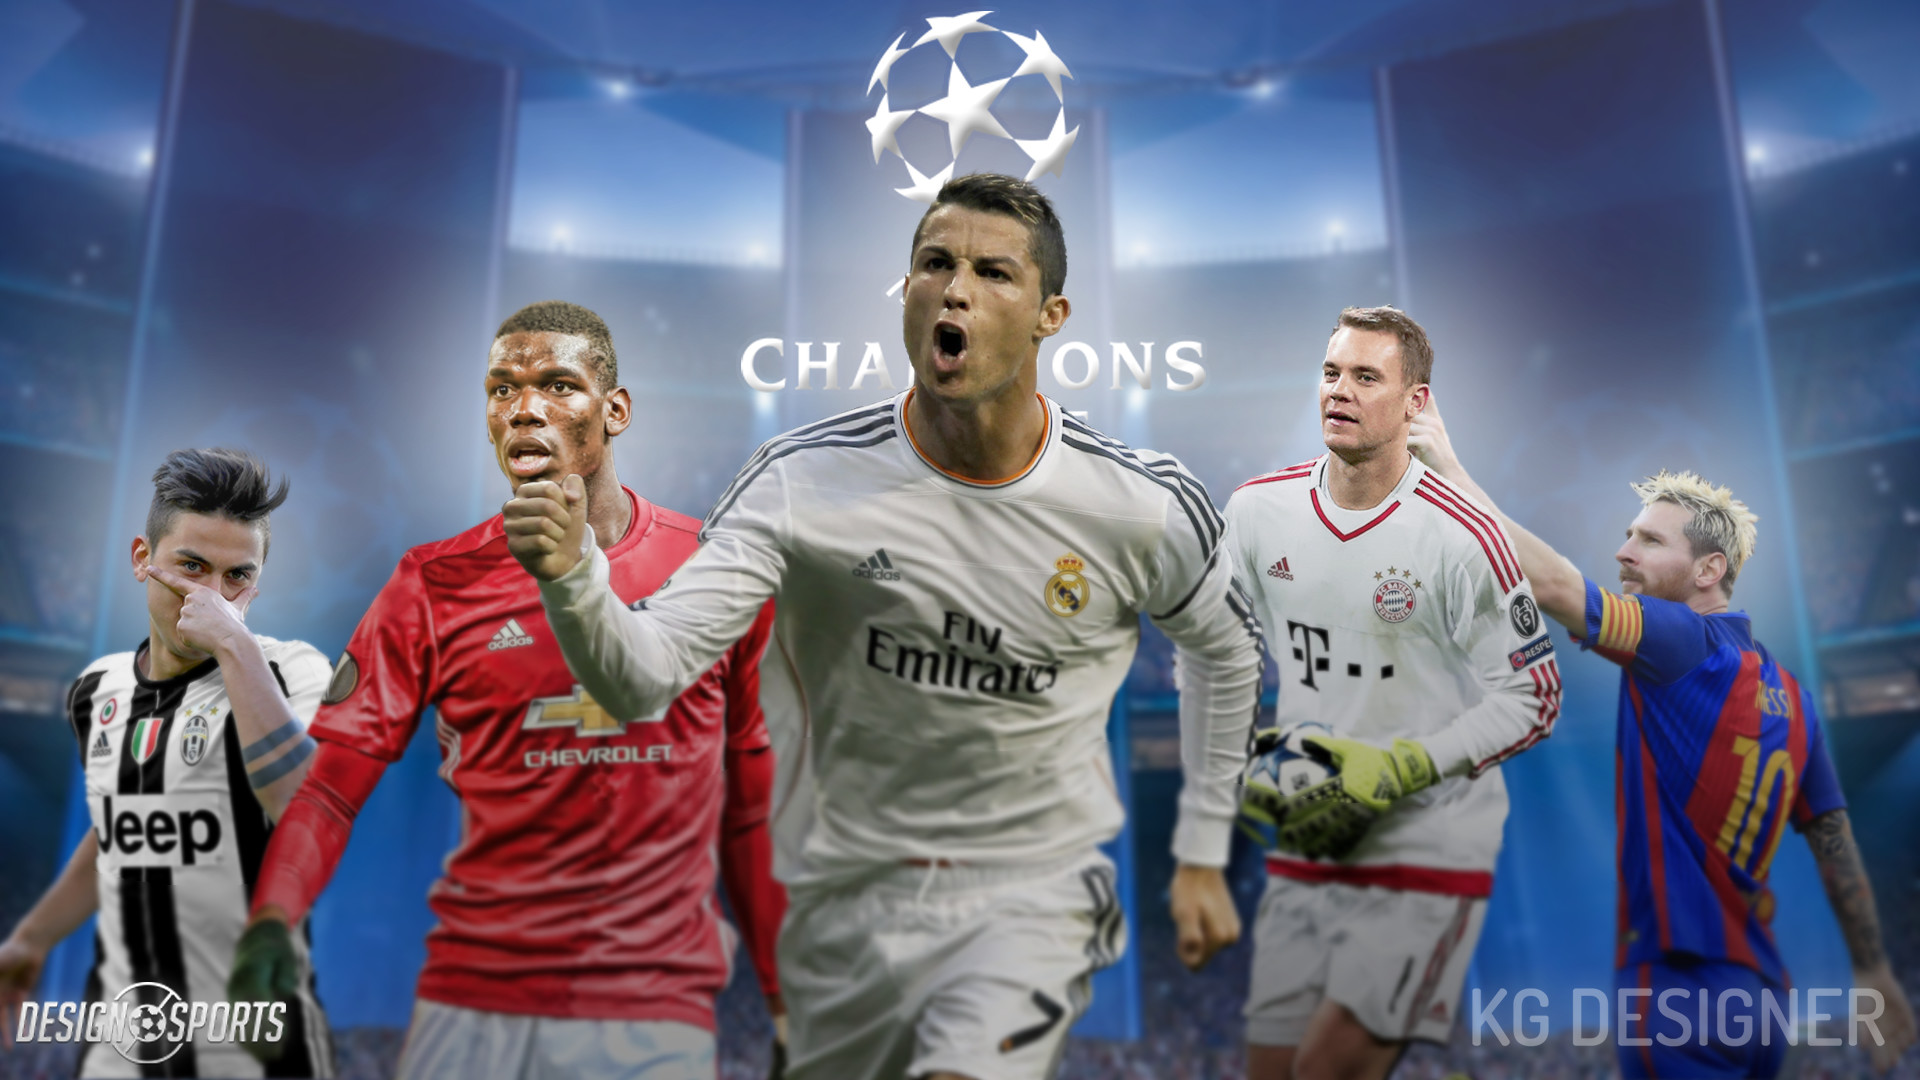 78 Champions League Wallpapers on WallpaperPlay